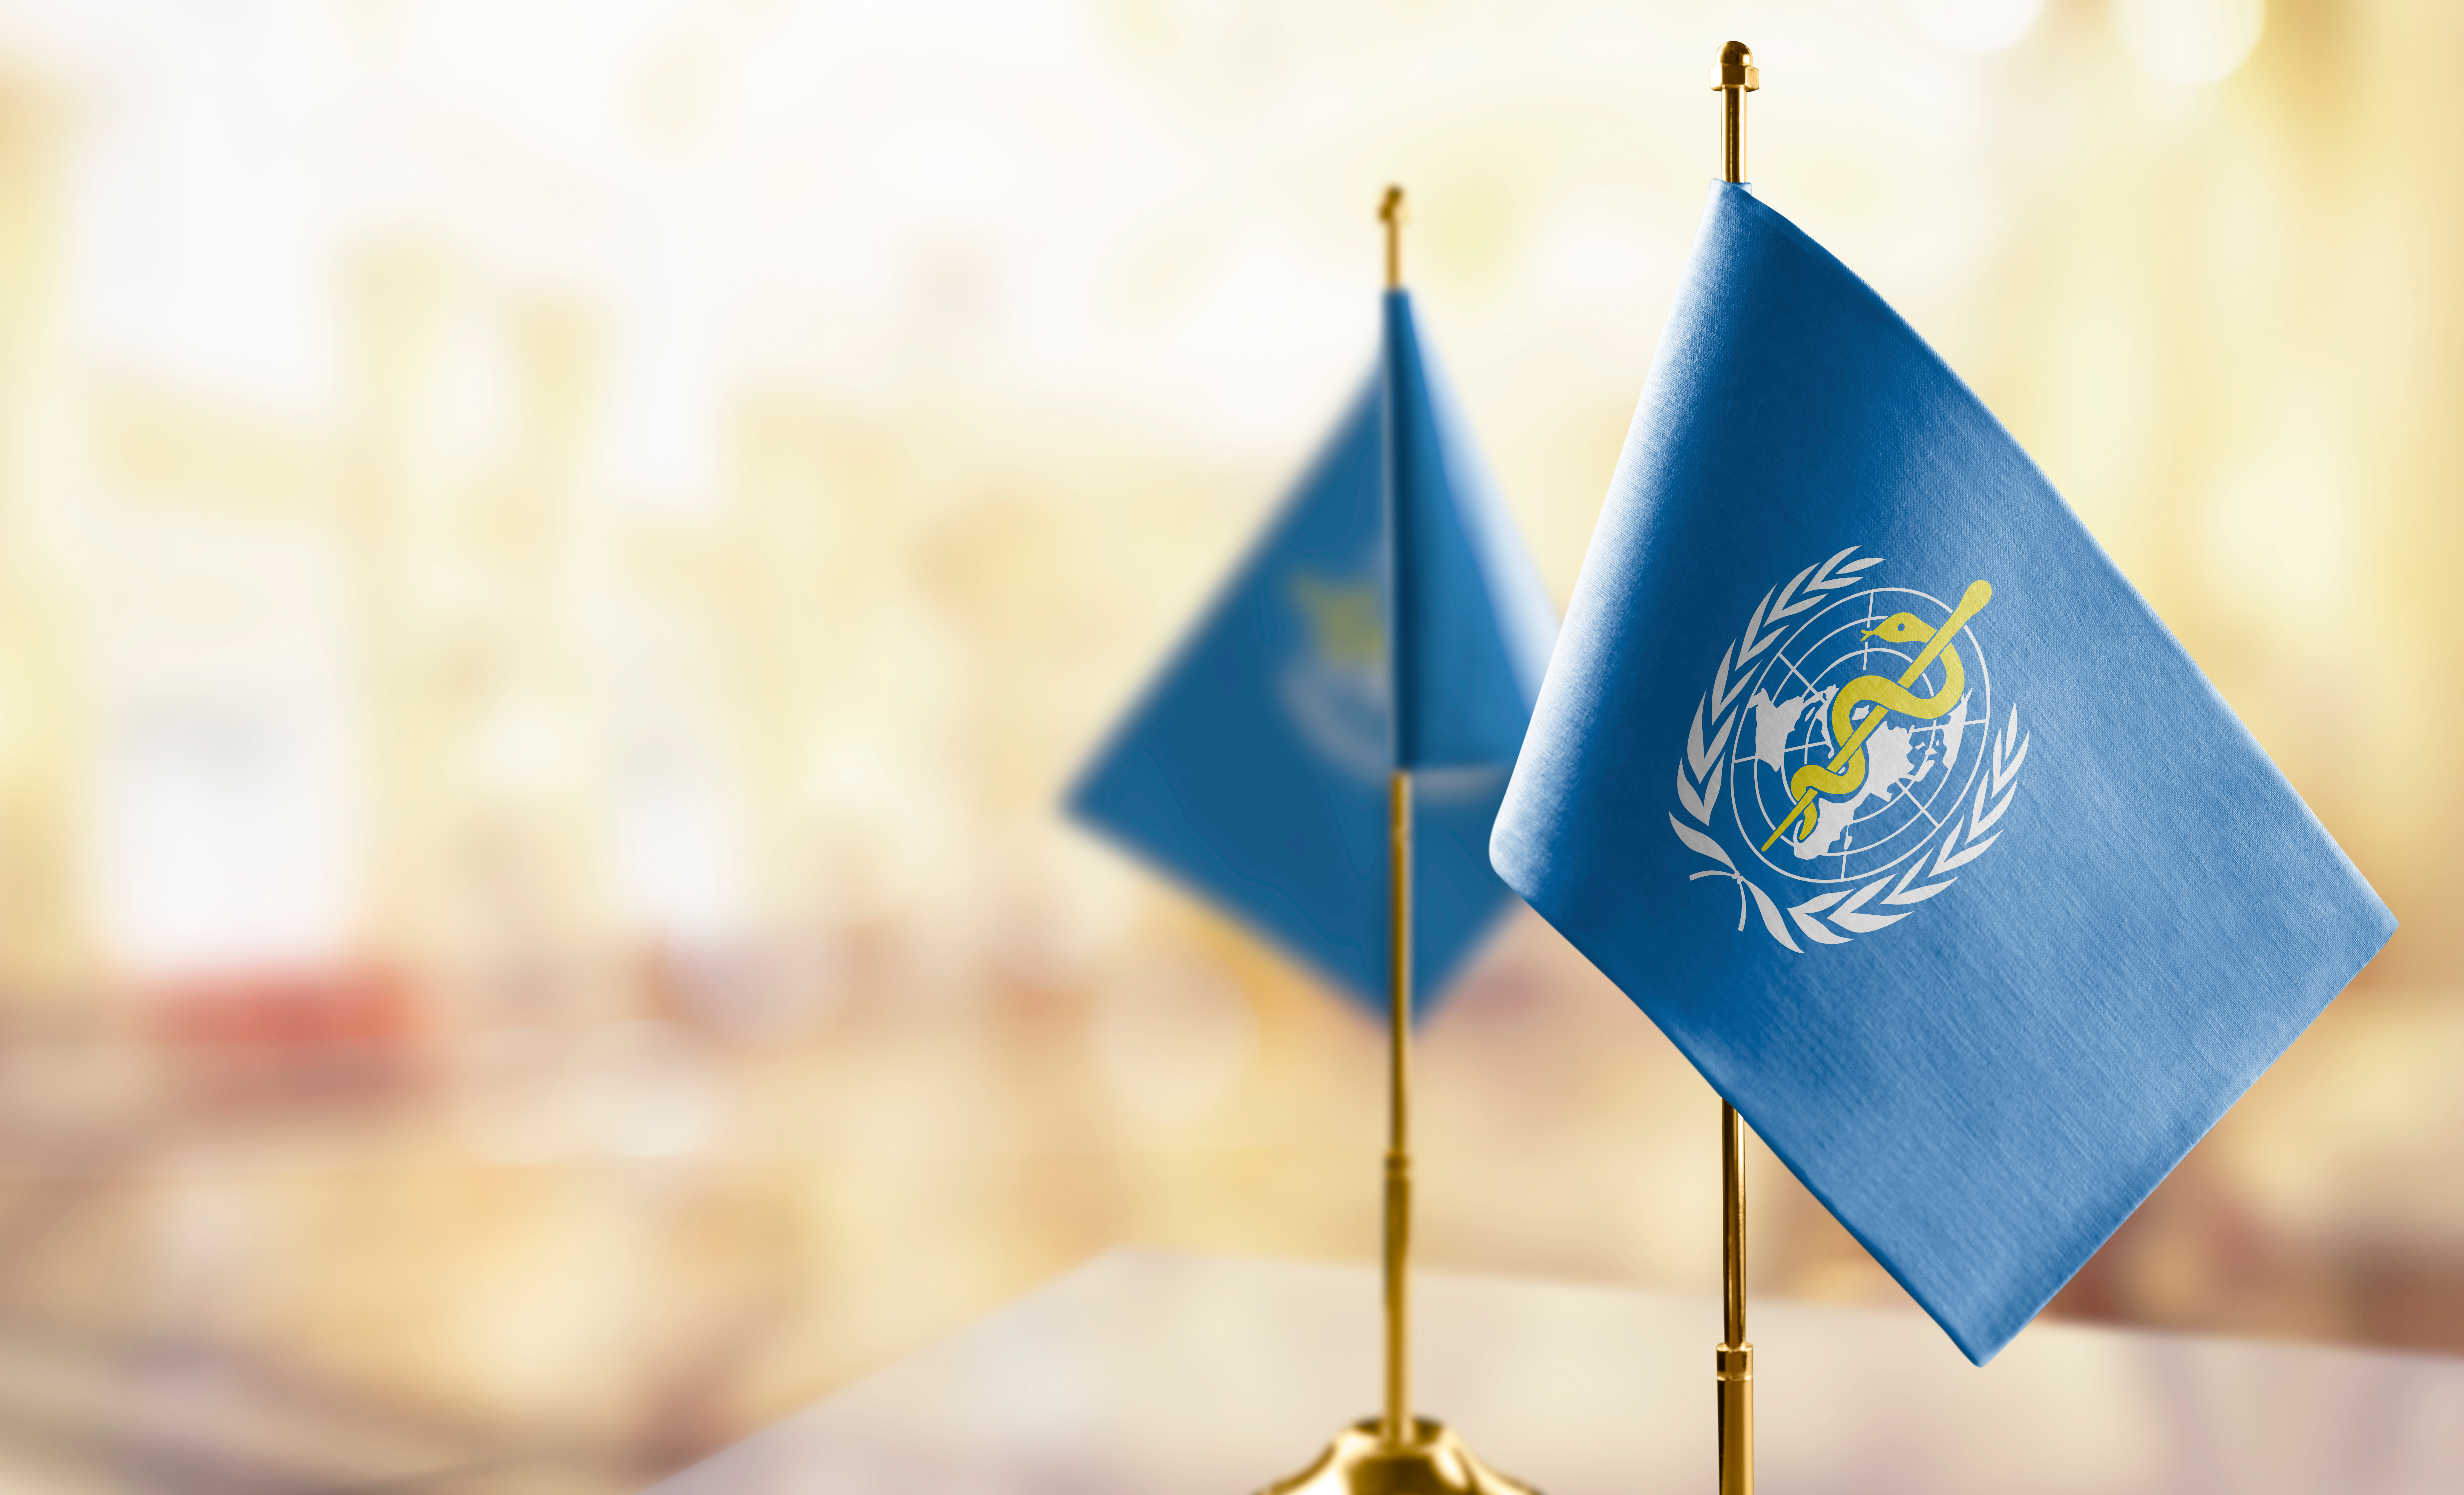 Small flags of the World Health Organization WHO on an abstract blurry background